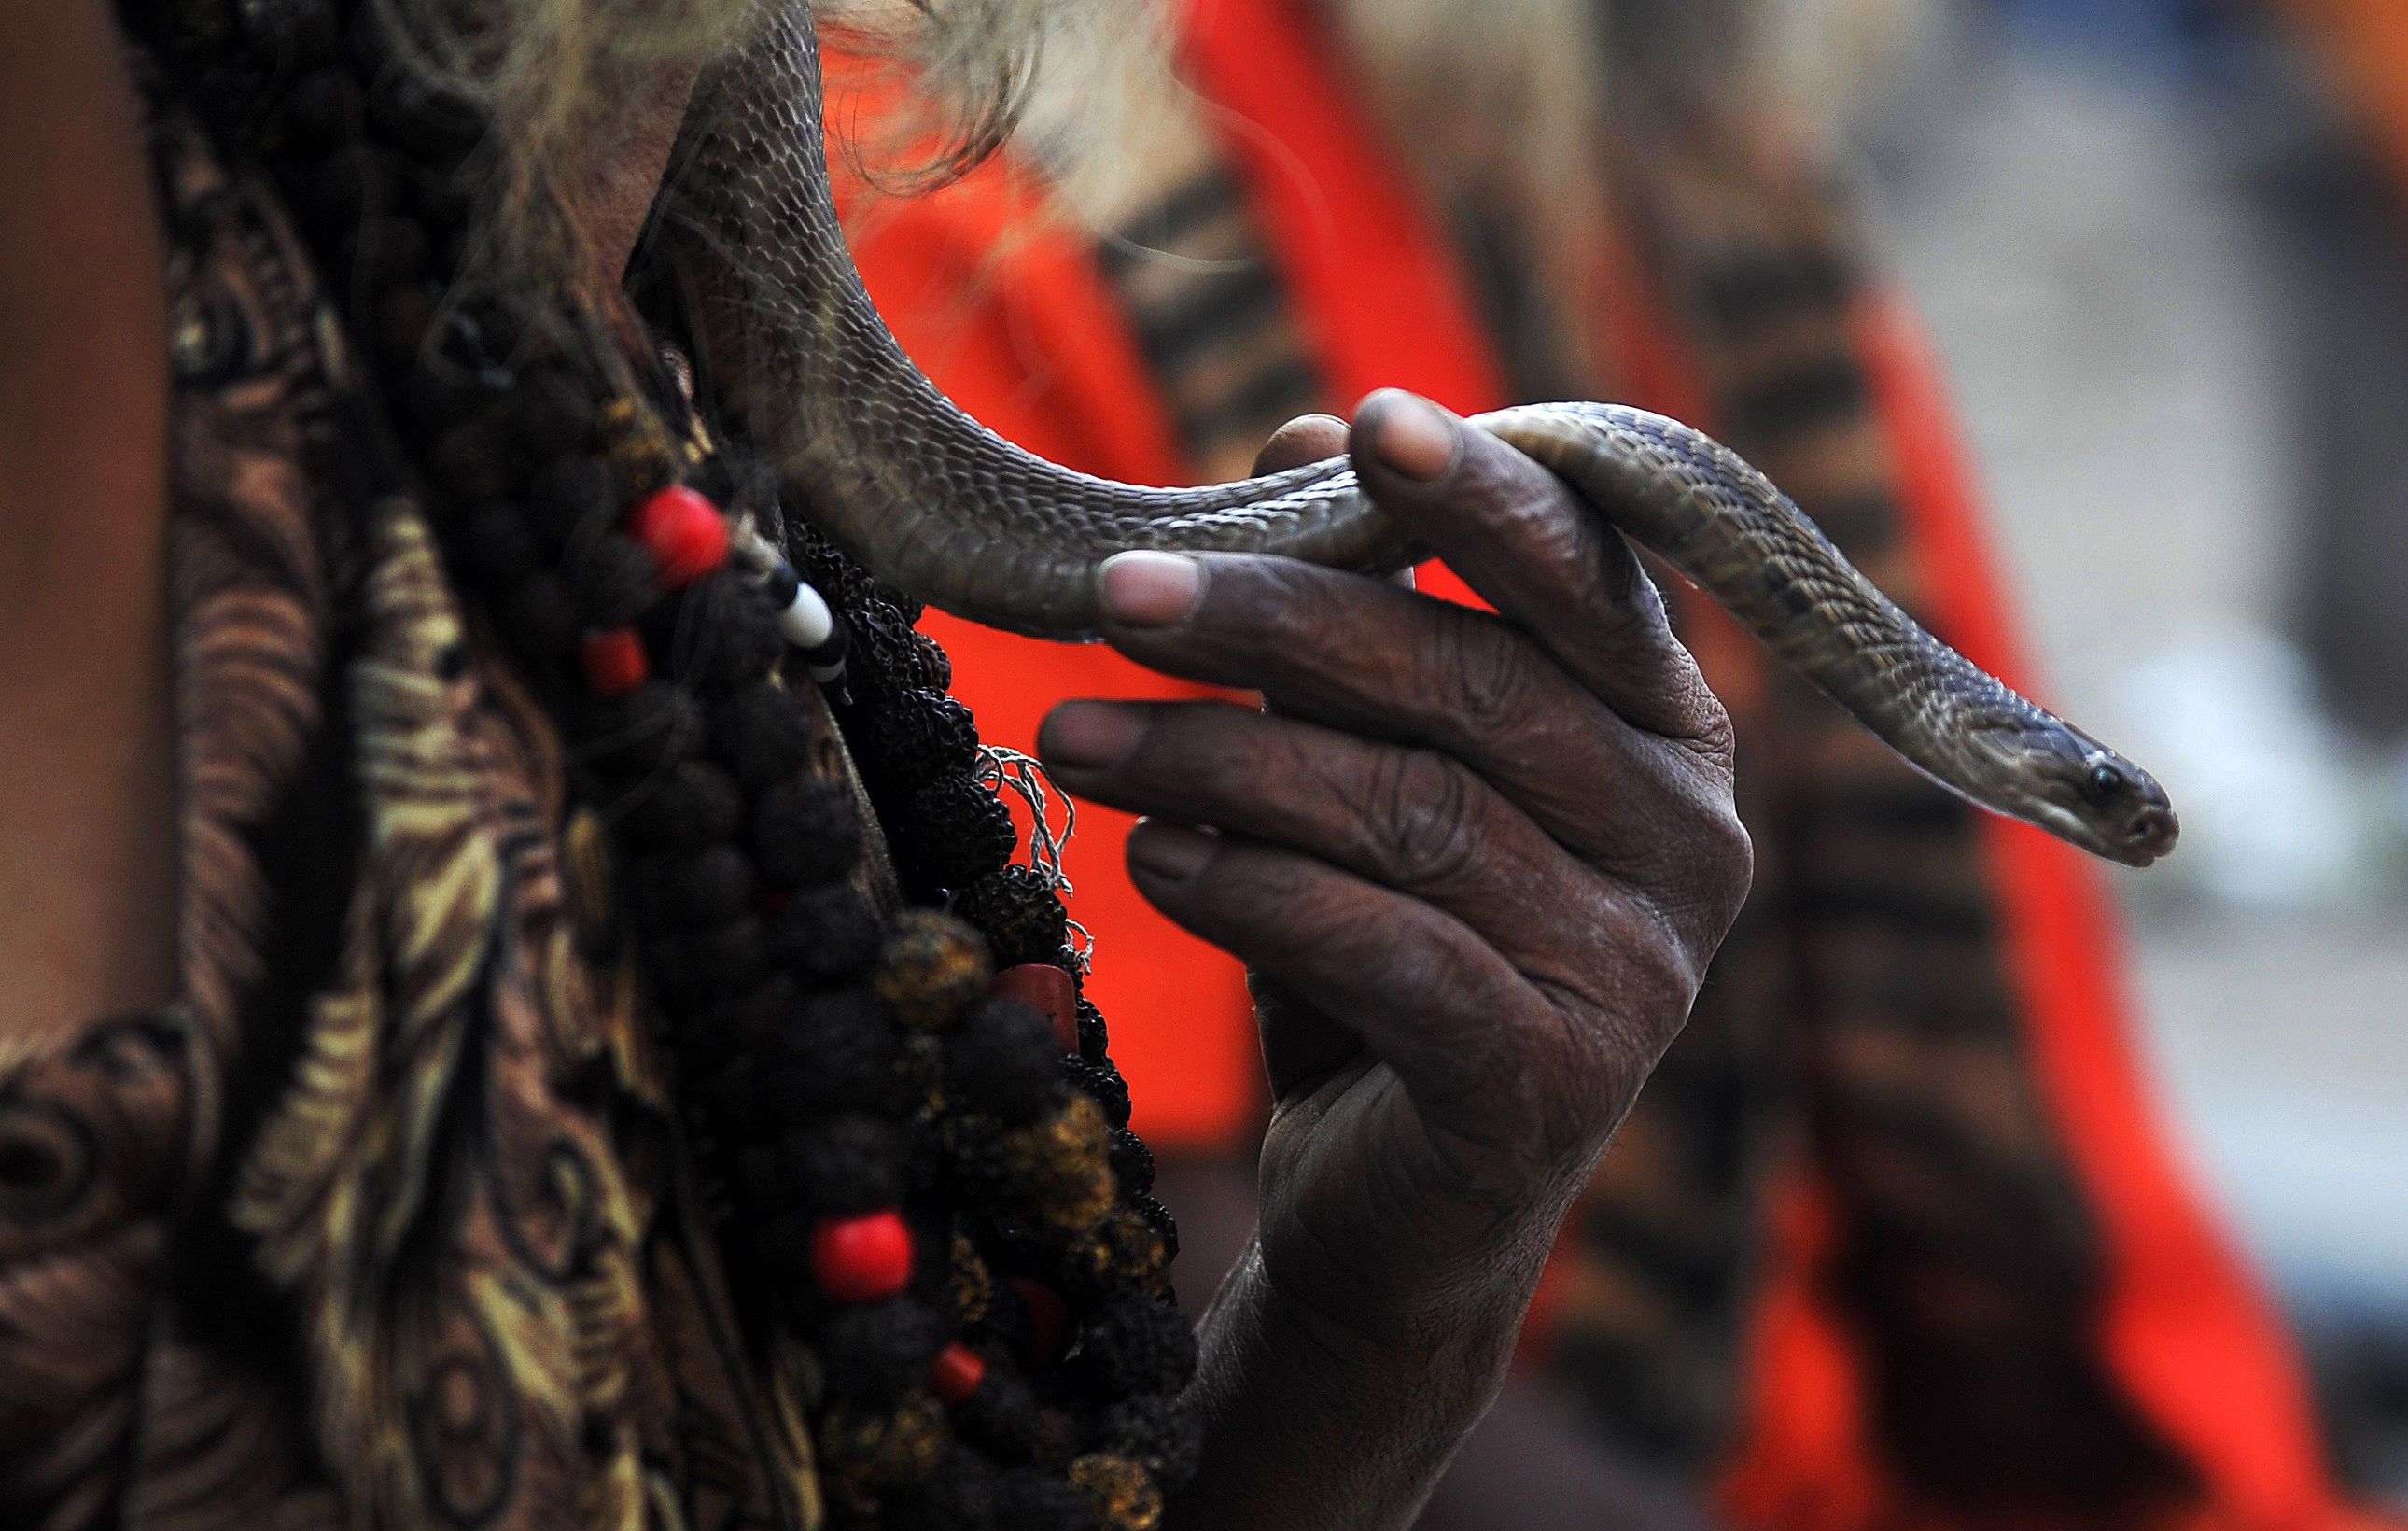 A Nepalese Sadhu (Hindu holy man) holds a snake as he sits near the Pashupatinath Temple during the Maha Shivaratri festival in Kathmandu on March 7, 2016. Hindus mark the Maha Shivratri festival by offering special prayers and fasting. Hundreds of sadhu have arrived in Kathmandu's Pashupatinath to take part in the Maha Shivaratri festival. / AFP / PRAKASH MATHEMA